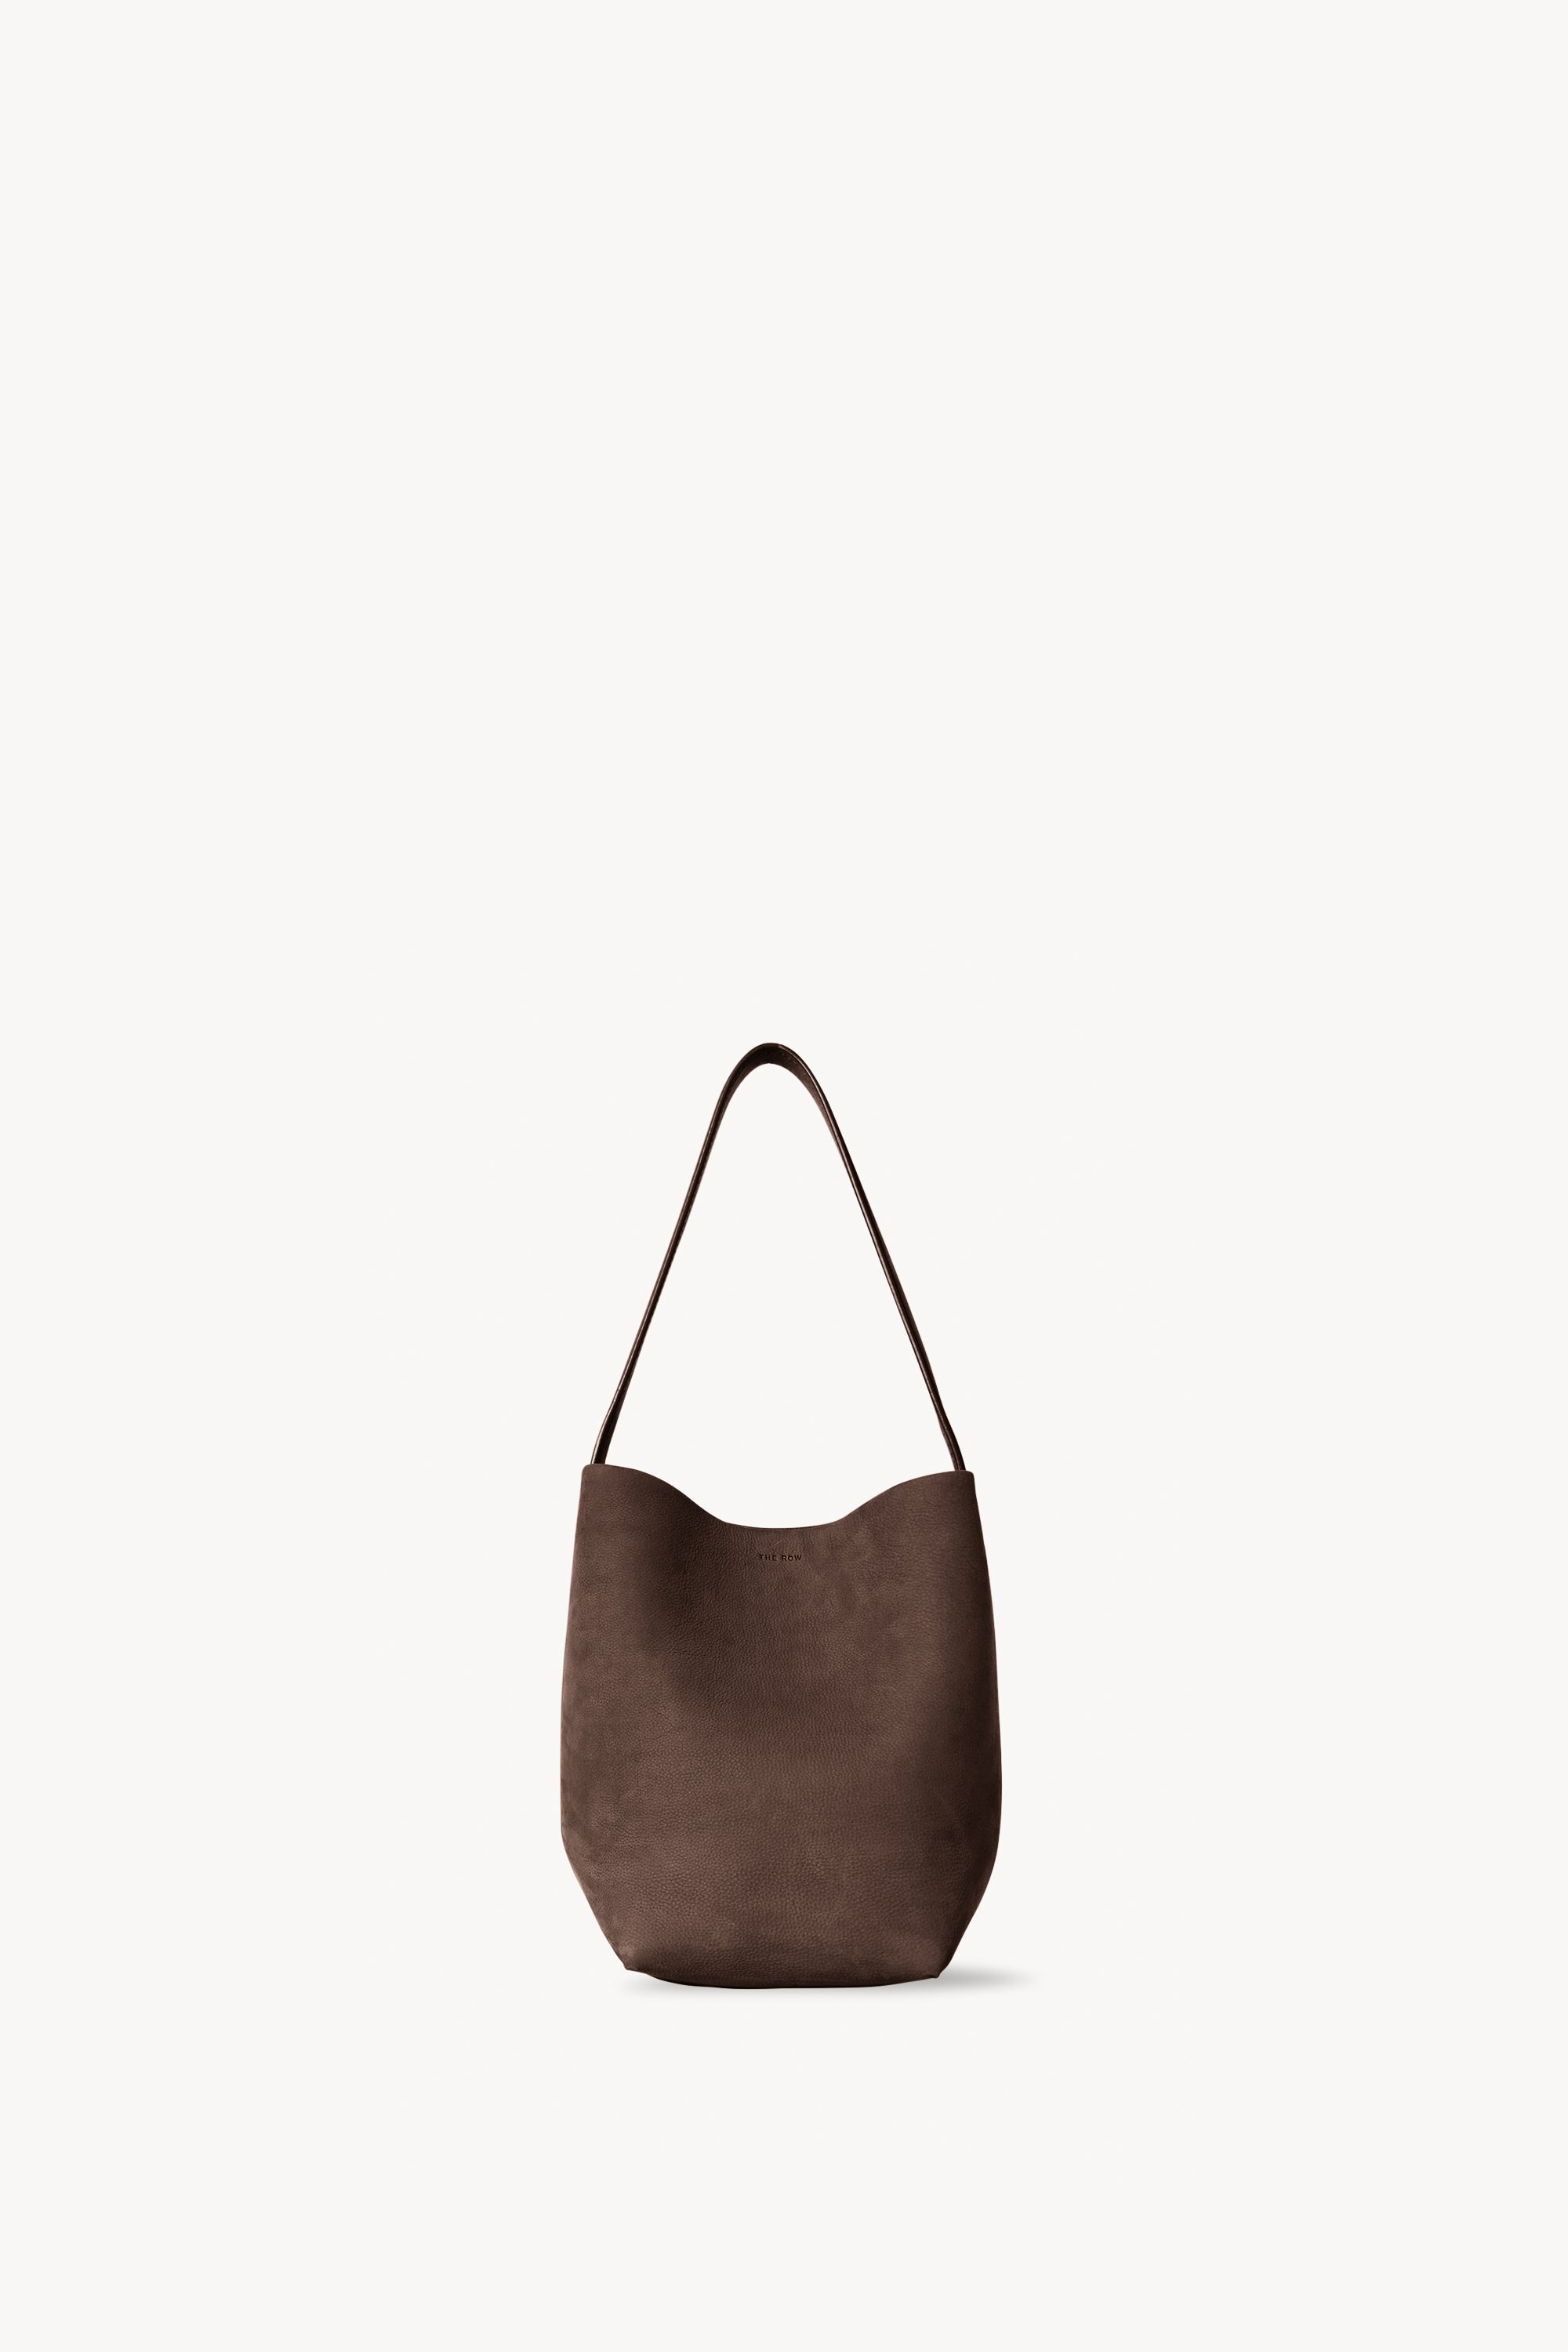 The Row Small N/s Park Elephant Leather Tote Bag in Brown